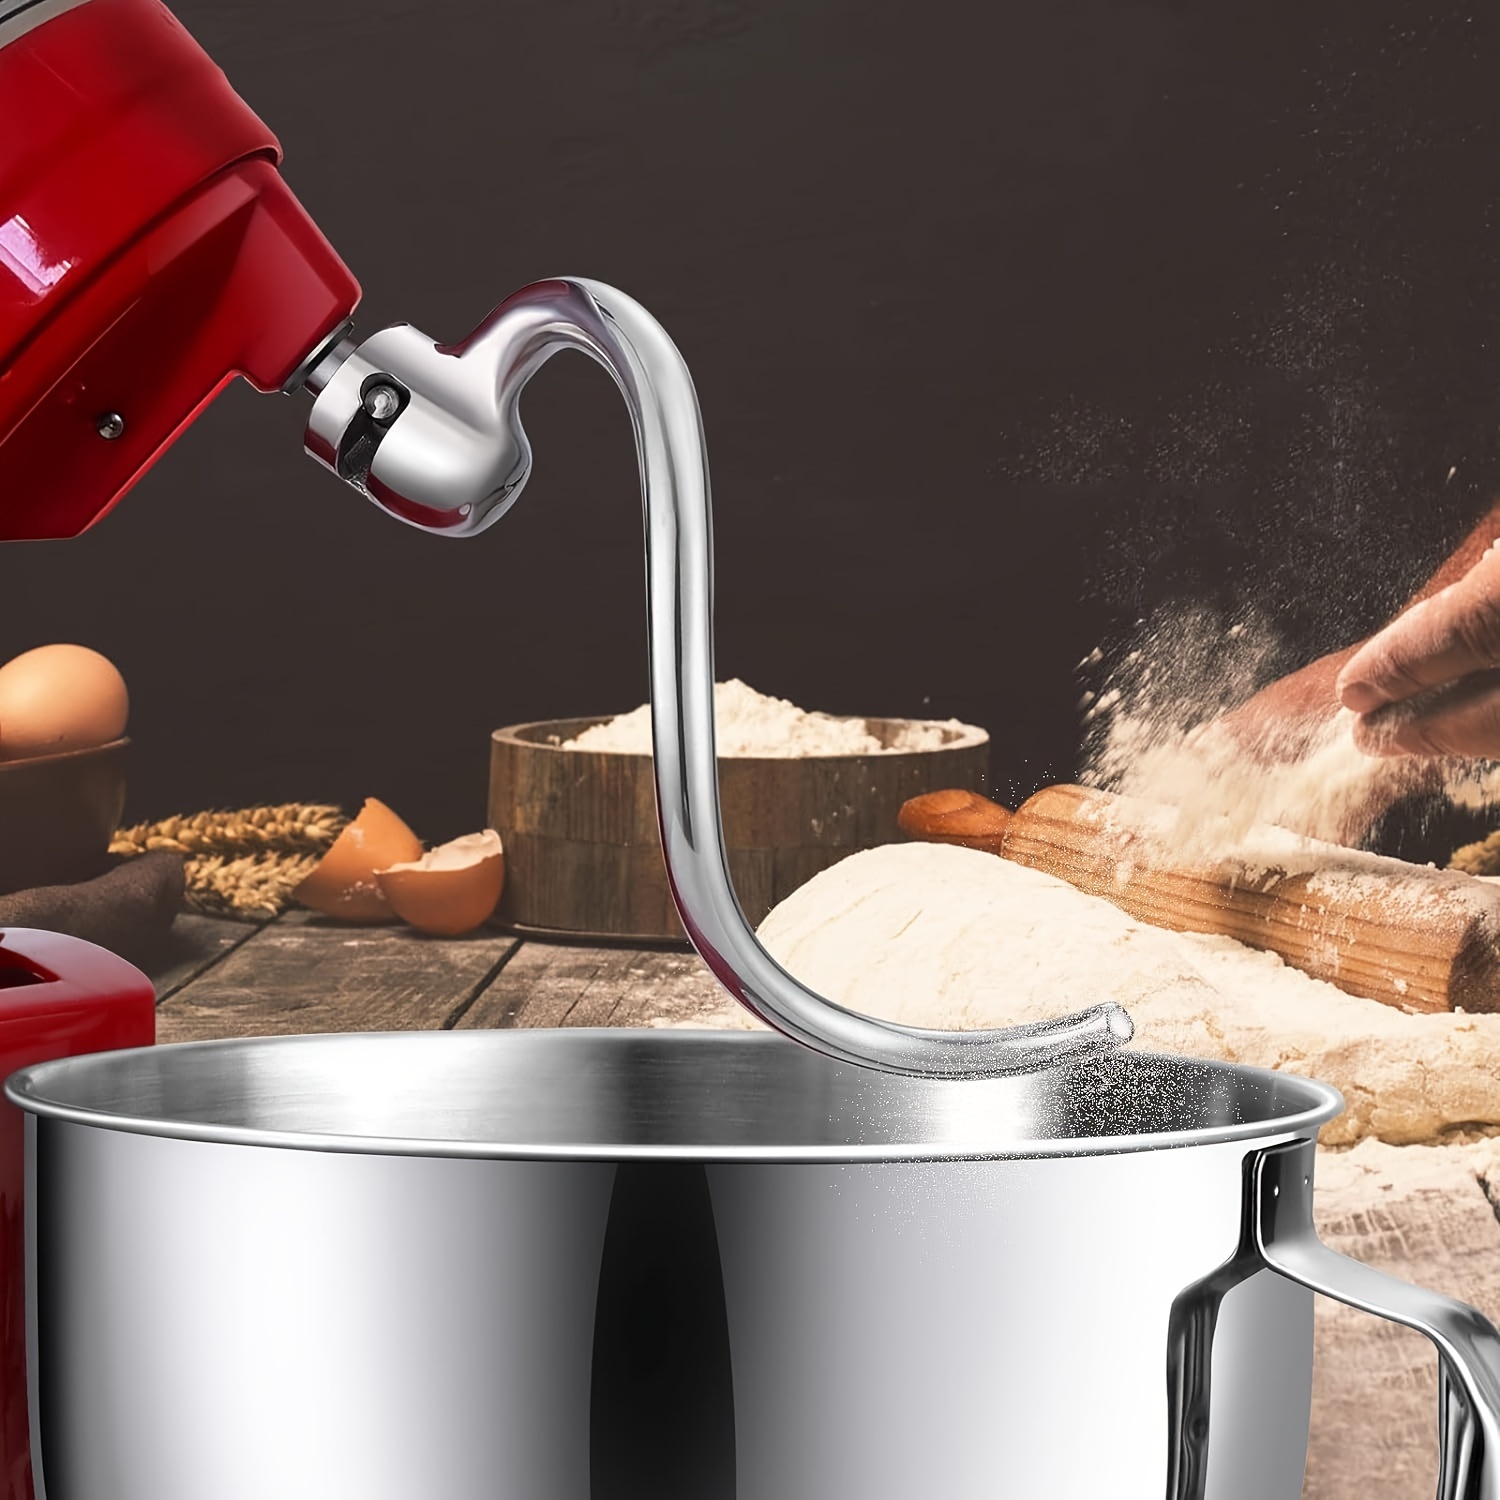 Kitchenaid Stainless Steel Spiral Dough Hook - Rustproof, Easy To Clean,  Efficient Kneading For Bread, Pizza, Pasta, - Replacement For 4.5qt & 5qt  Bowl Tilt-head Stand Mixers - Temu